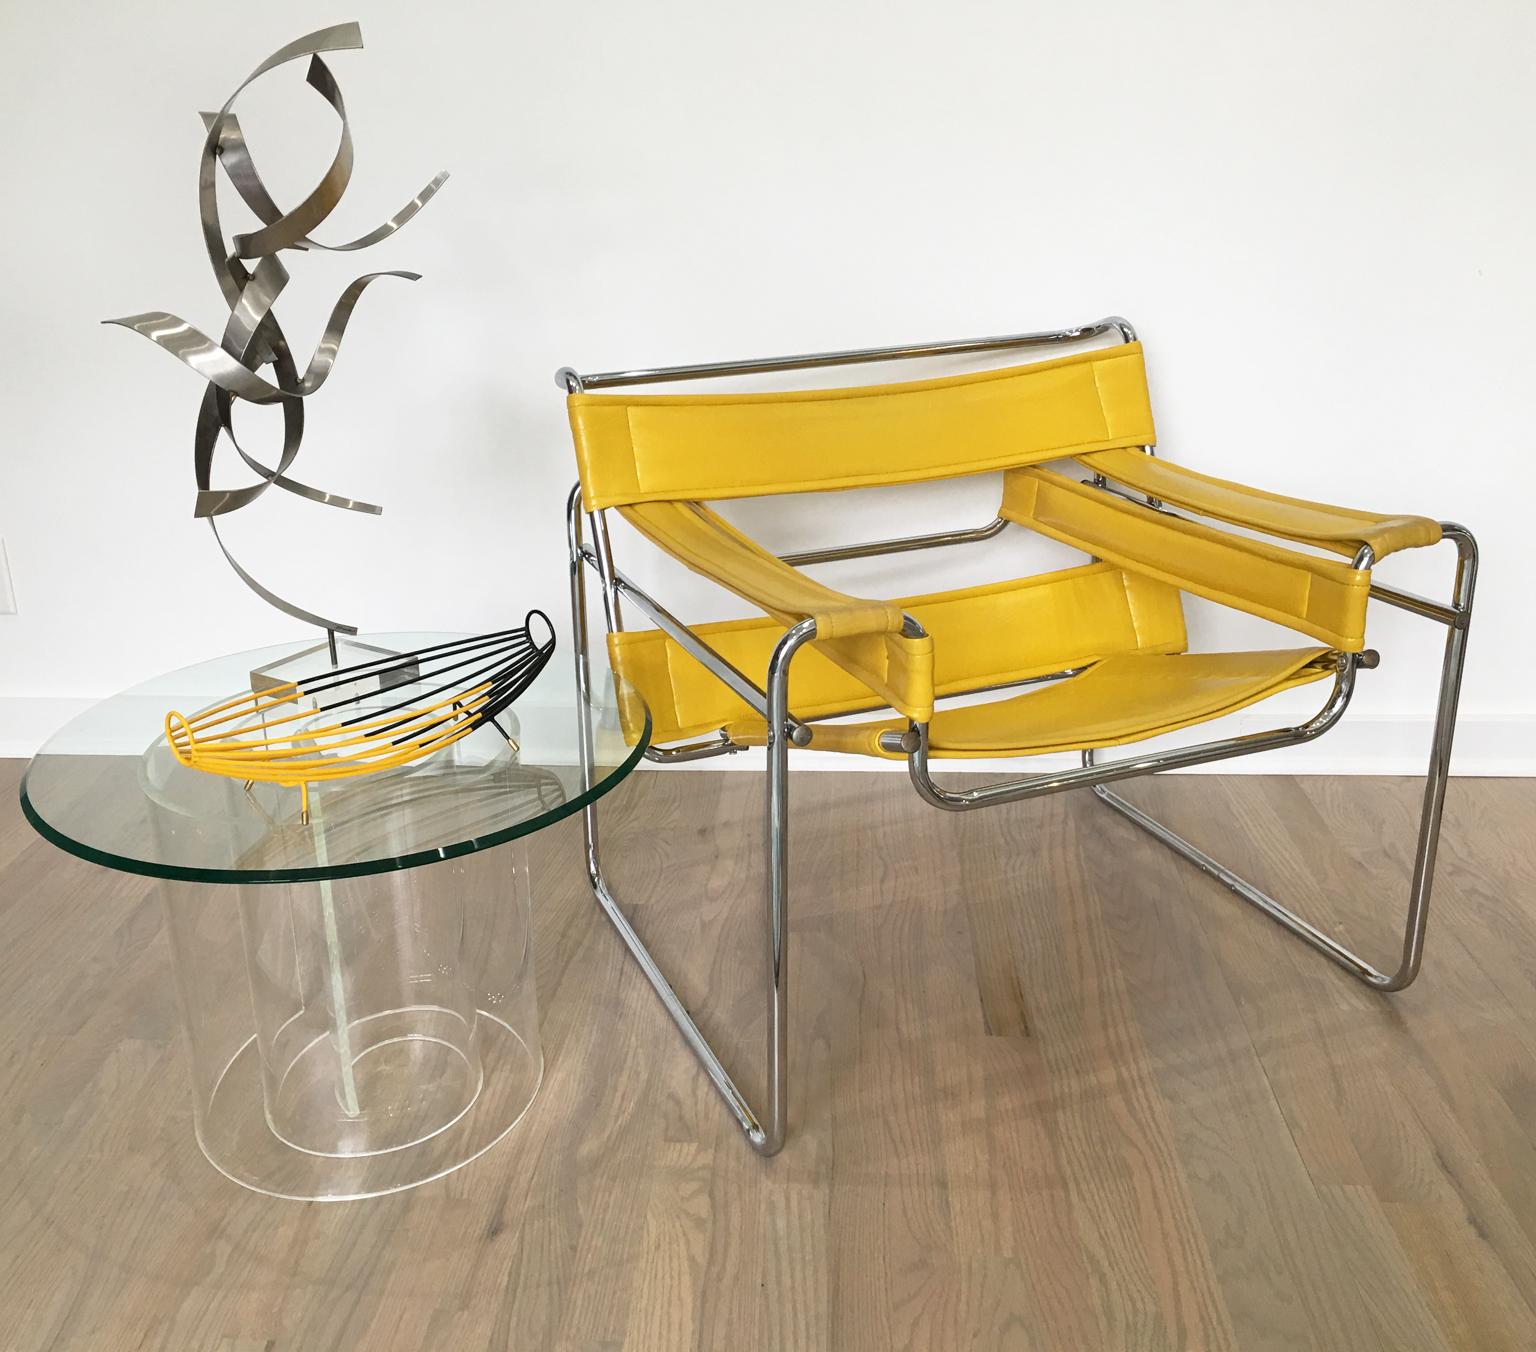 Stunning 1980s chrome and PVC leather (vinyl synthetic leather) chair or armchair in the style of the iconic Wassily chair by Marcel Breuer. Incredible yellow Dijon mustard color that will give a boost of color to your interior. A highly comfortable